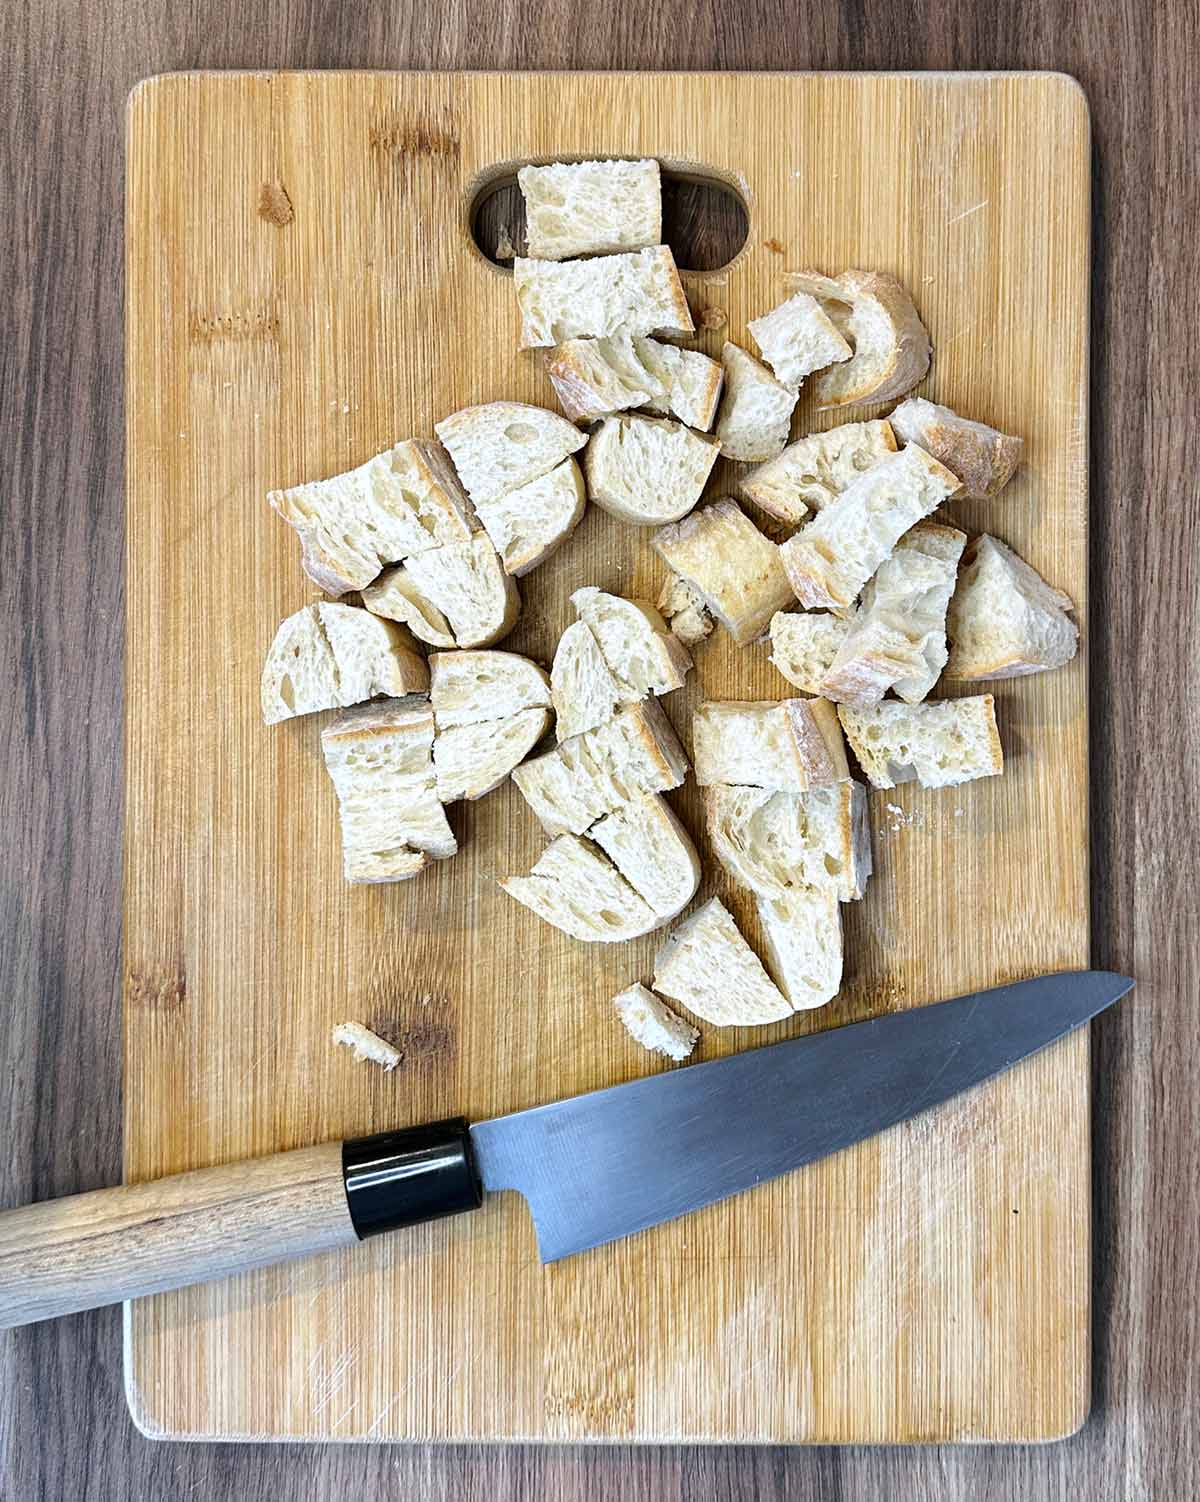 Bread chopped into cubes on a wooden chopping board.